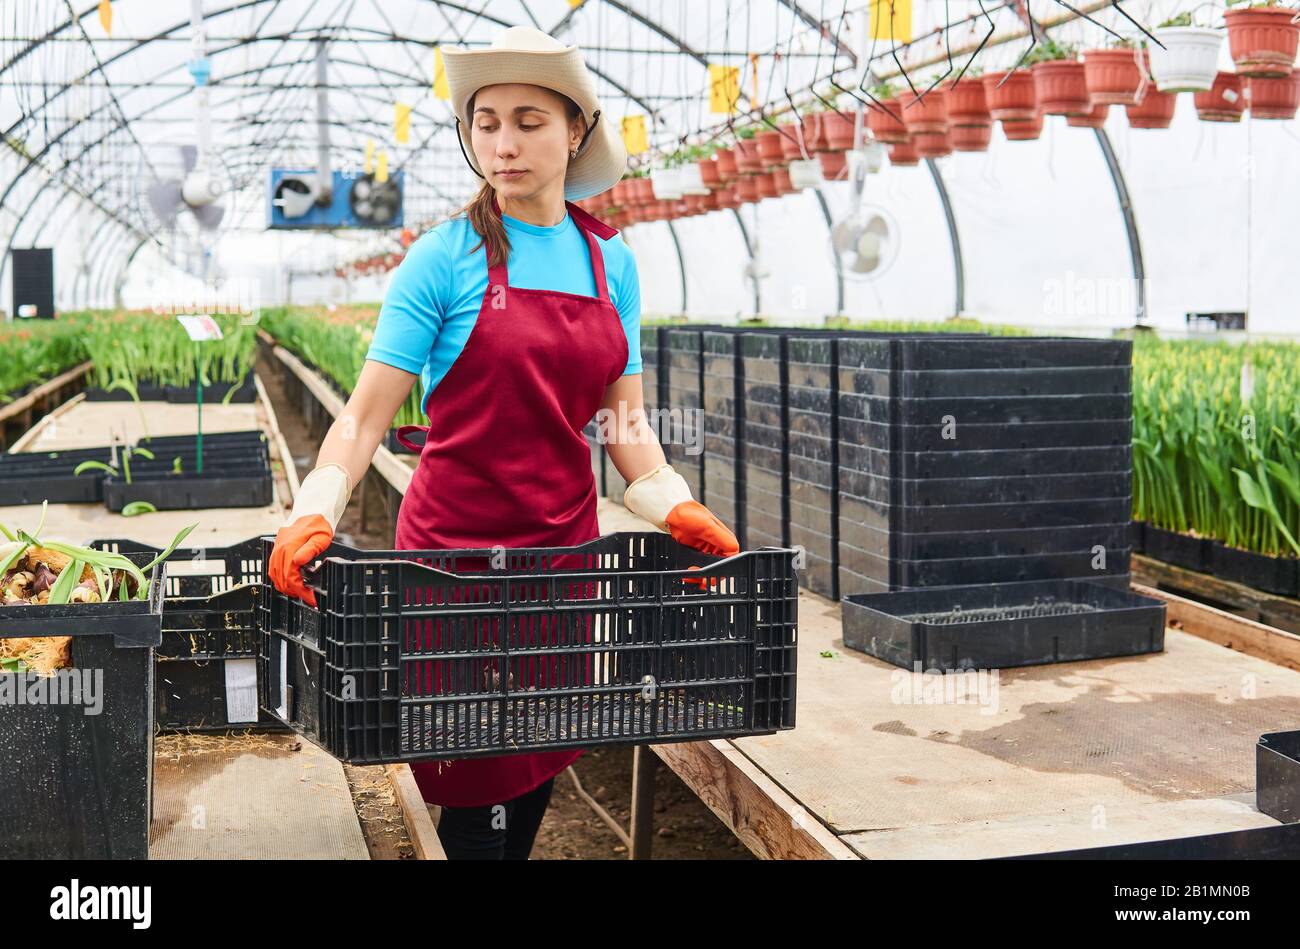 young woman working with plant boxes in an industrial flower greenhouse Stock Photo